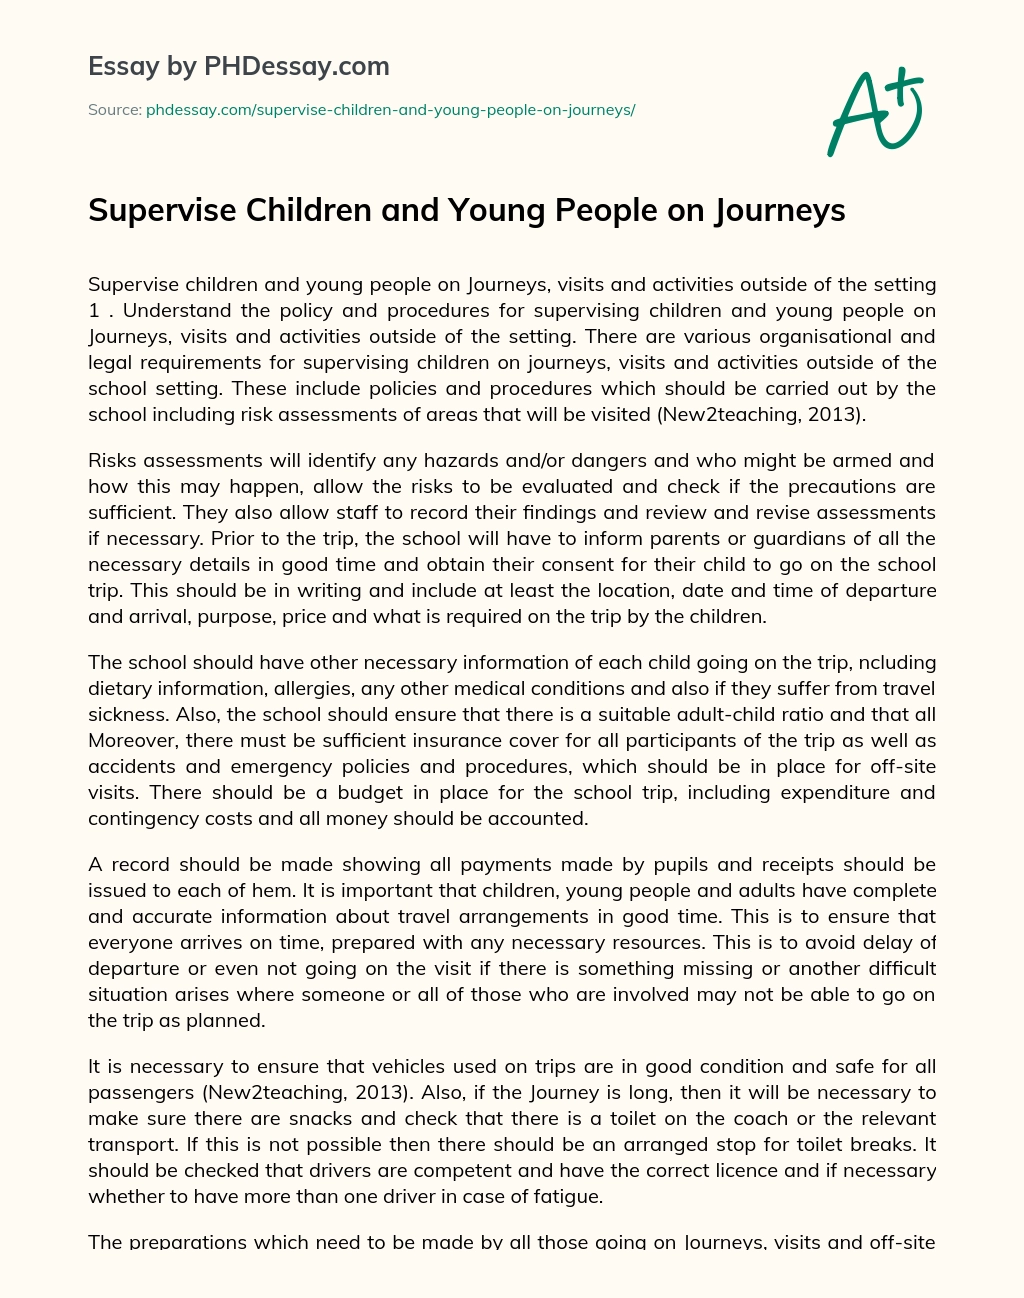 Supervise Children and Young People on Journeys essay